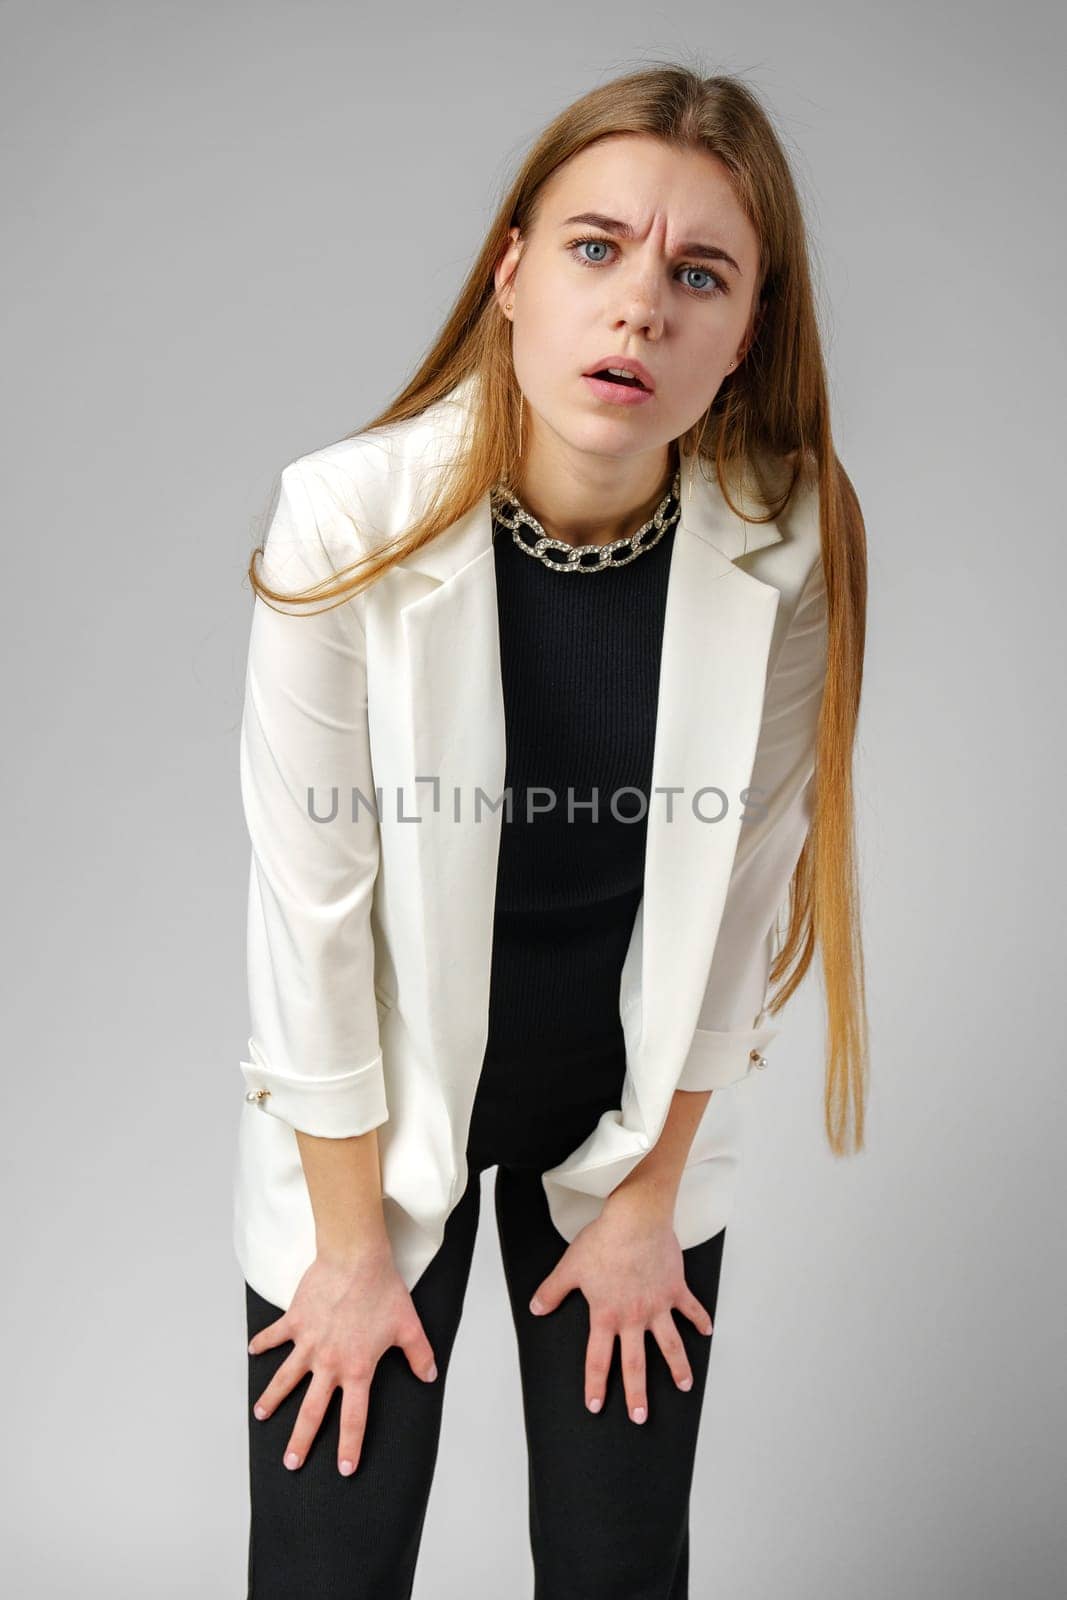 Young Woman Expressing Discontent against gray background by Fabrikasimf